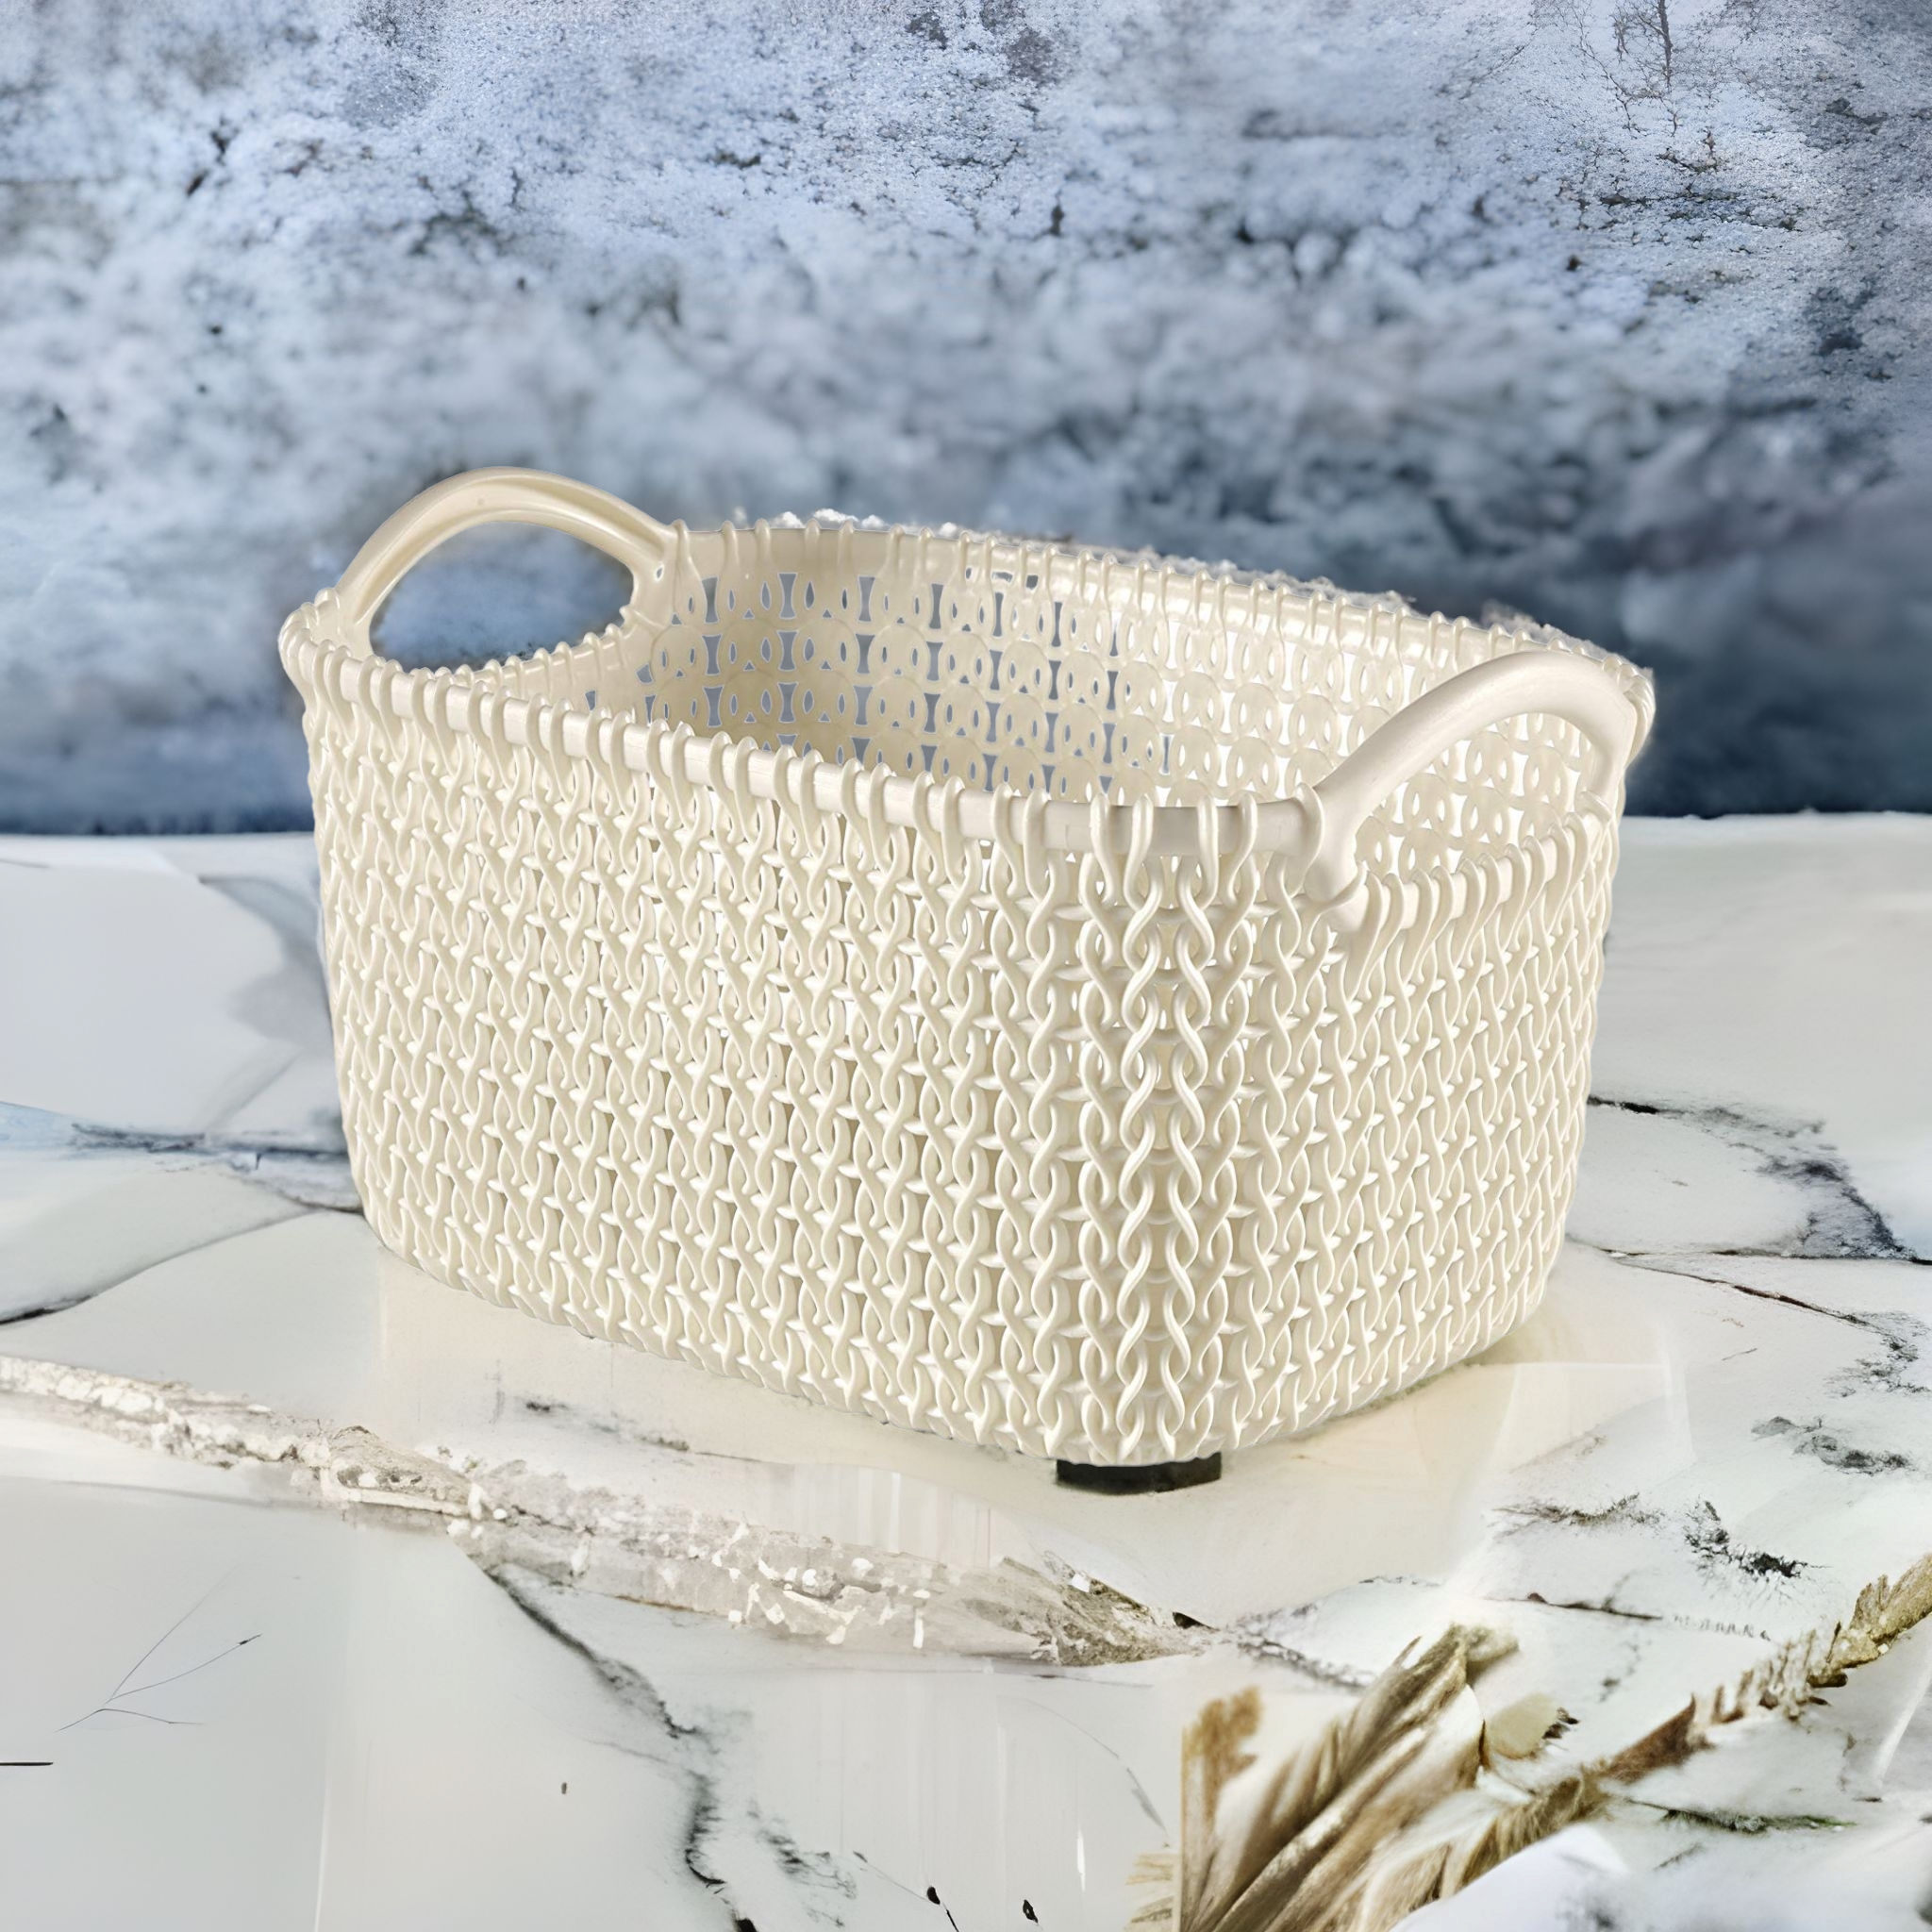 Laundry Knit Carry Basket Plastic Big with Handle